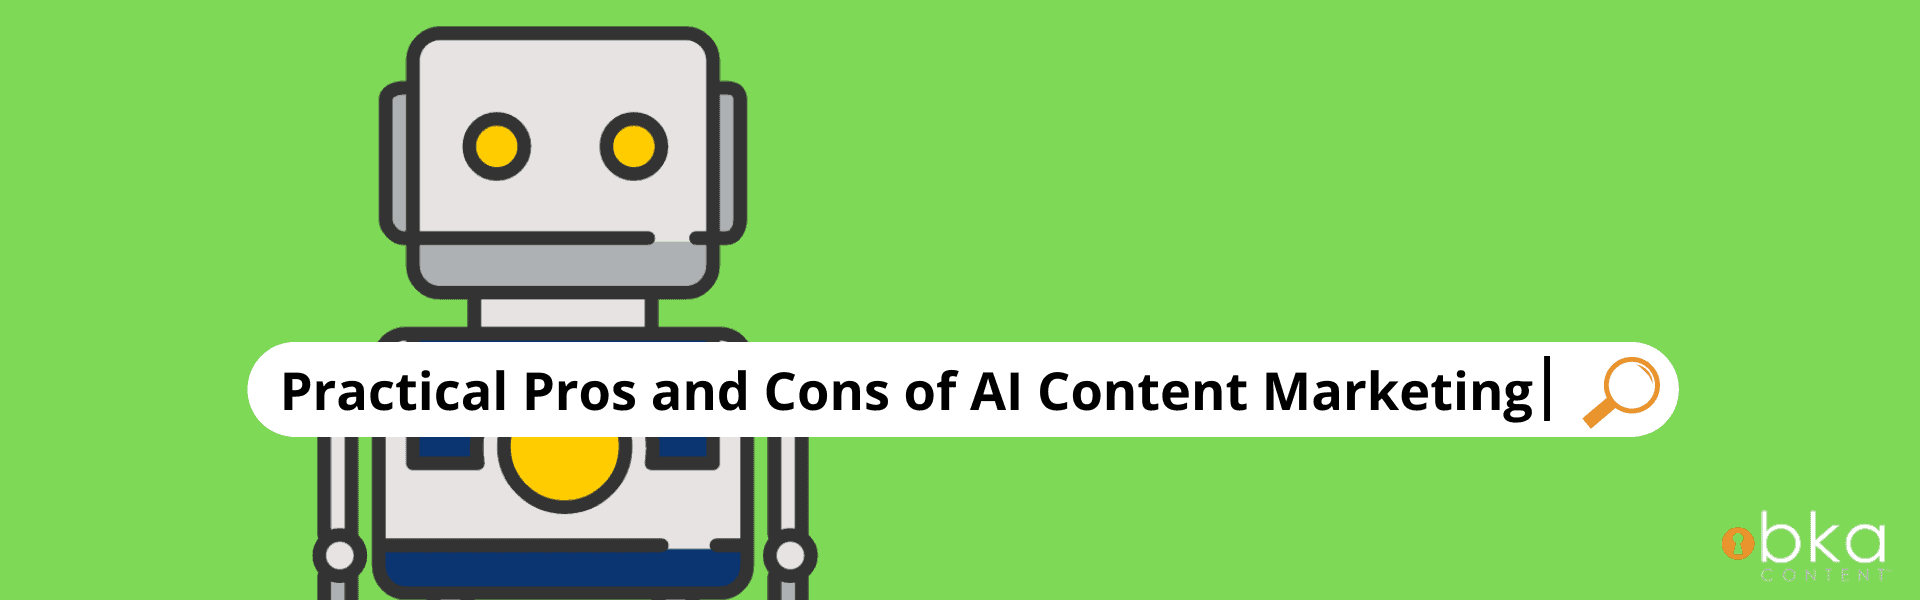 pros and cons of ai content marketing